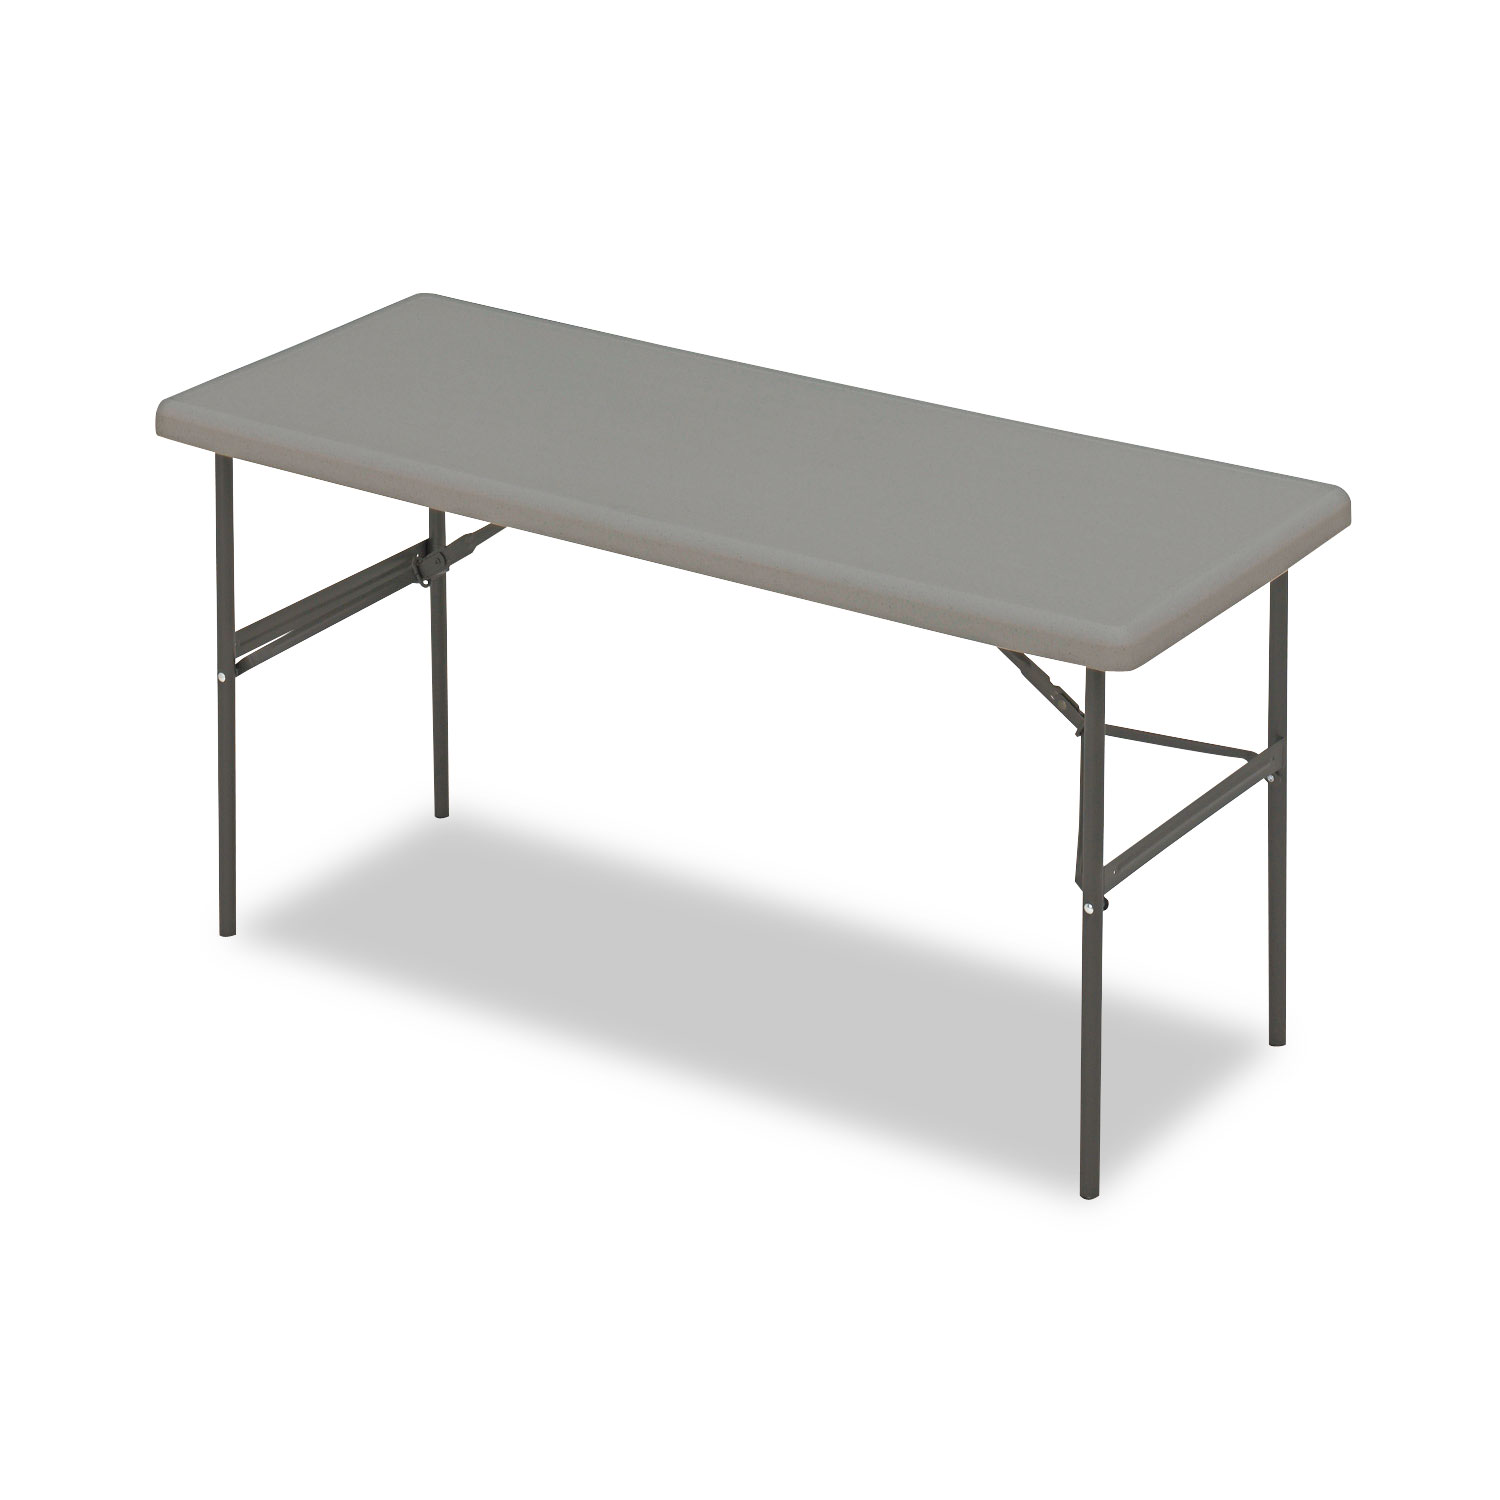  Iceberg 65377 IndestrucTables Too 1200 Series Folding Table, 60w x 24d x 29h, Charcoal (ICE65377) 